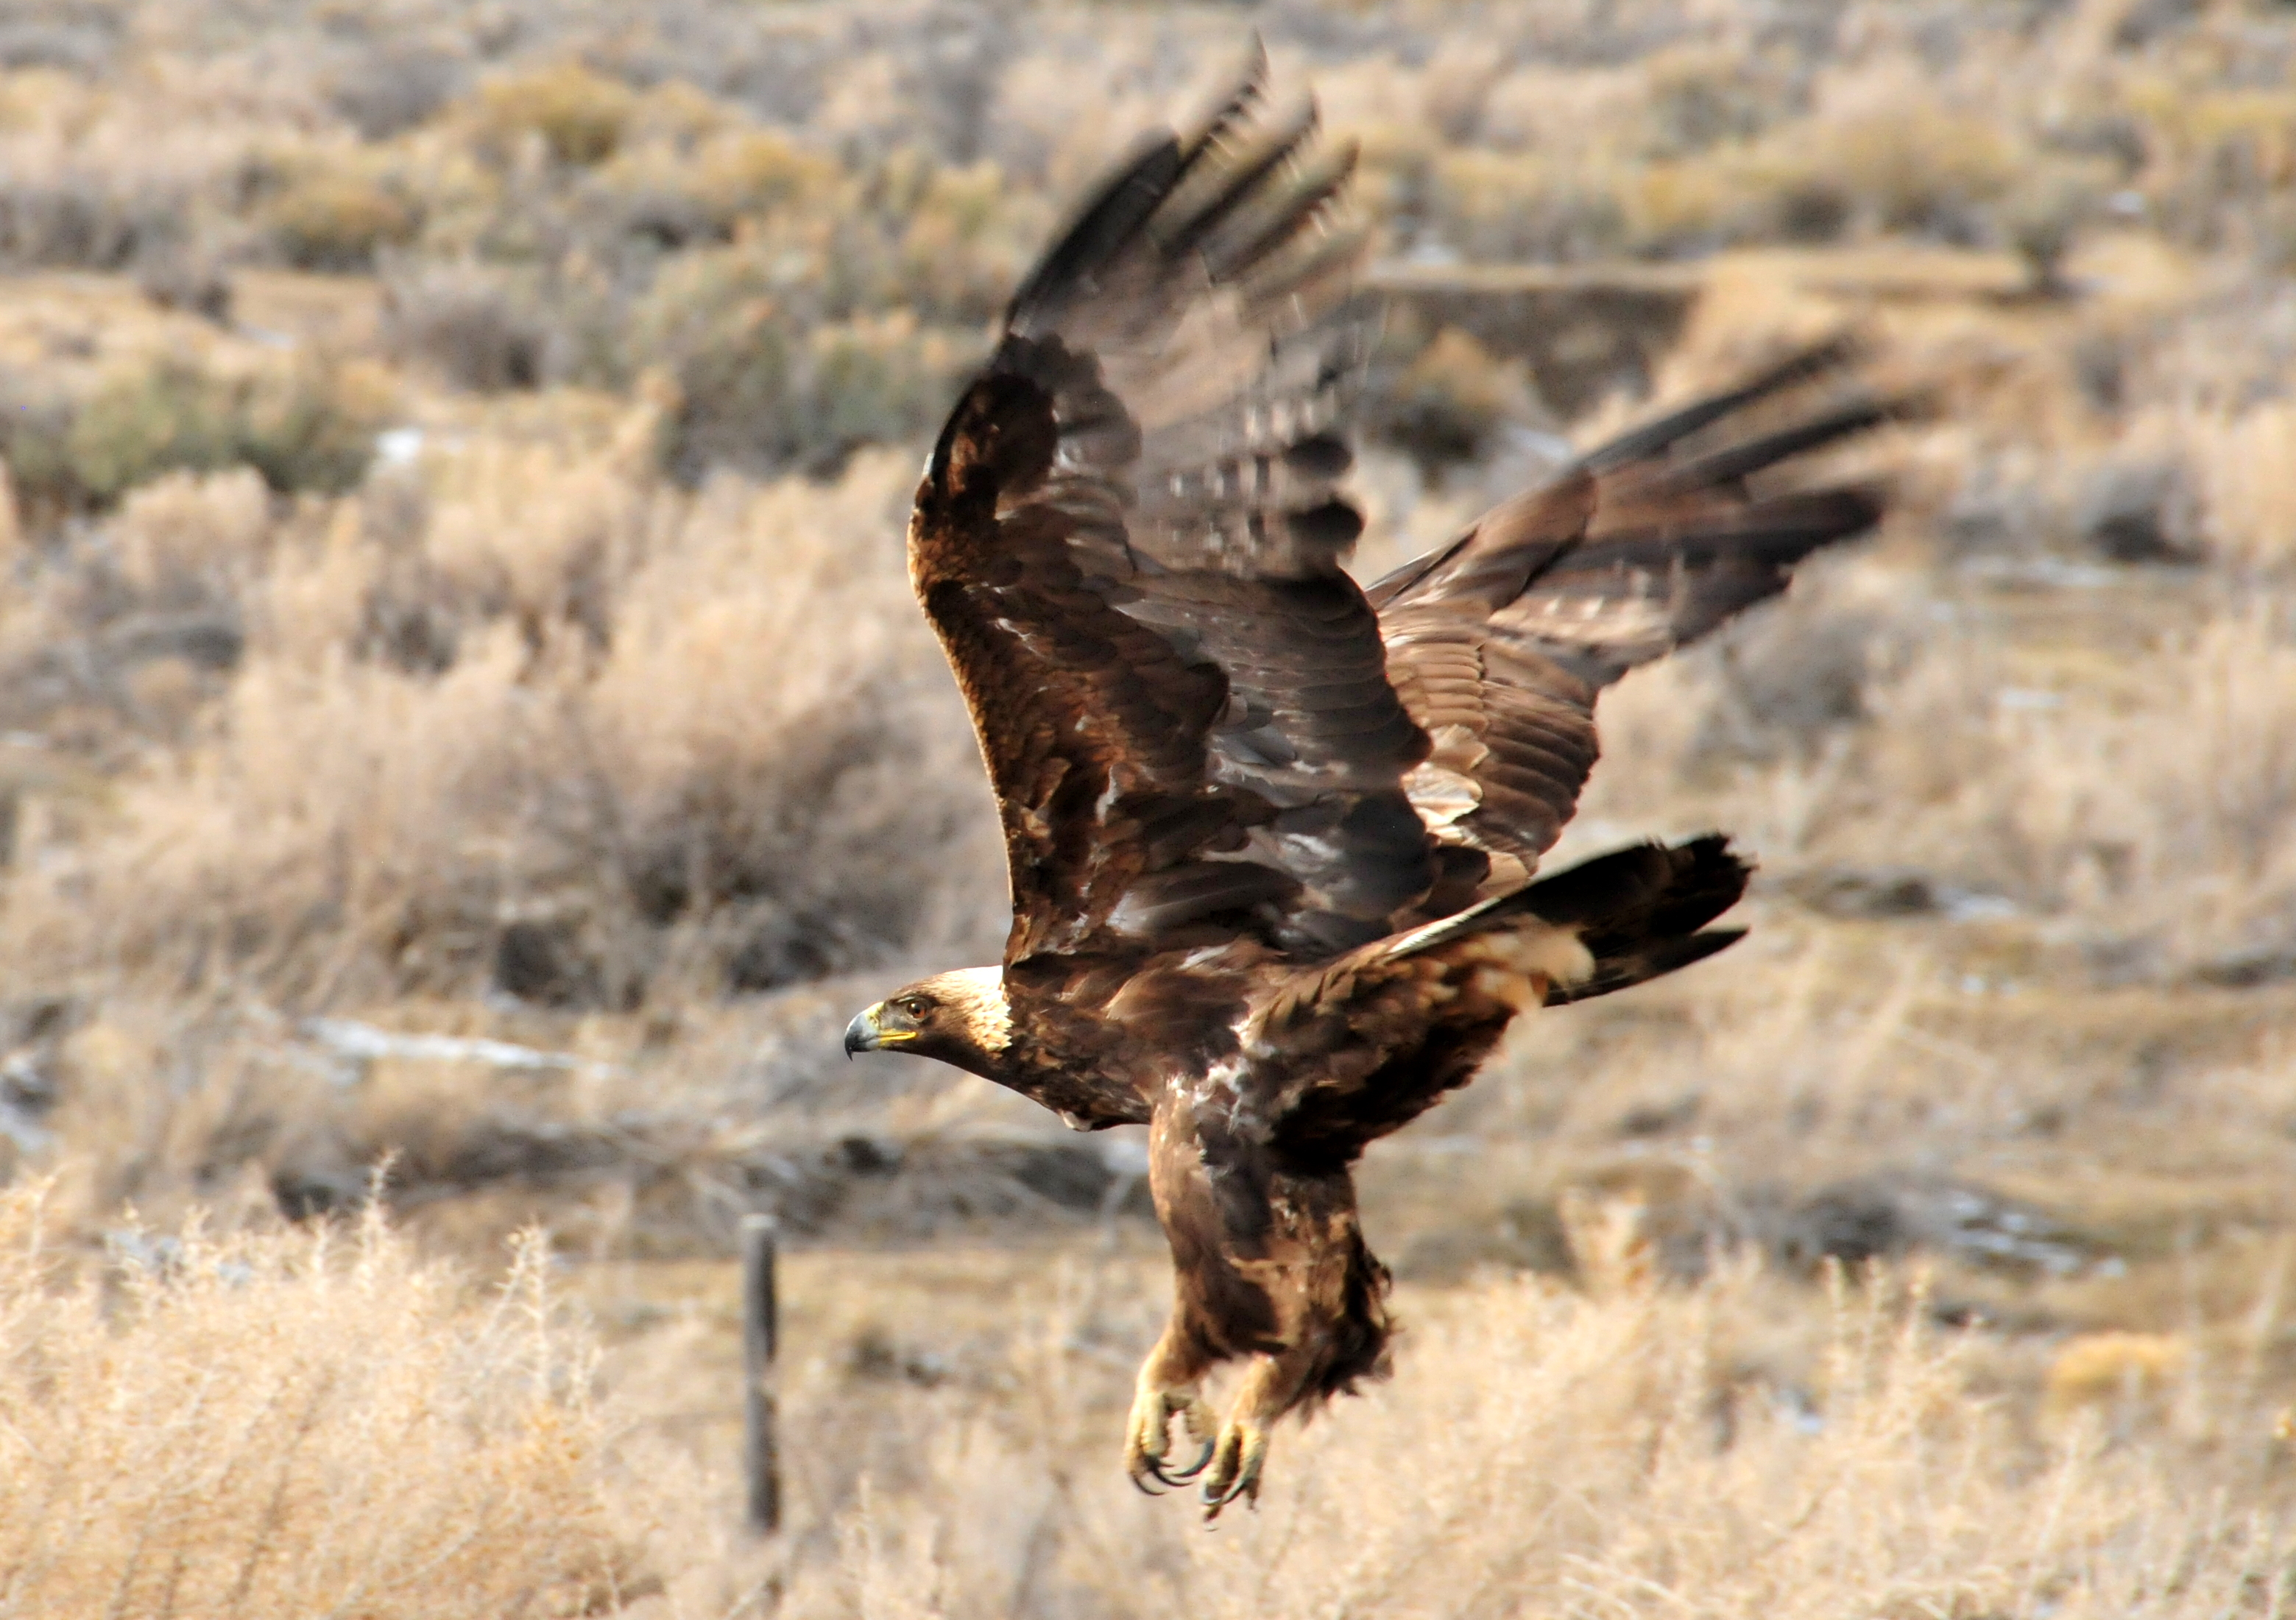 Golden eagle flys low over the sagebrush steppe in Wyoming.